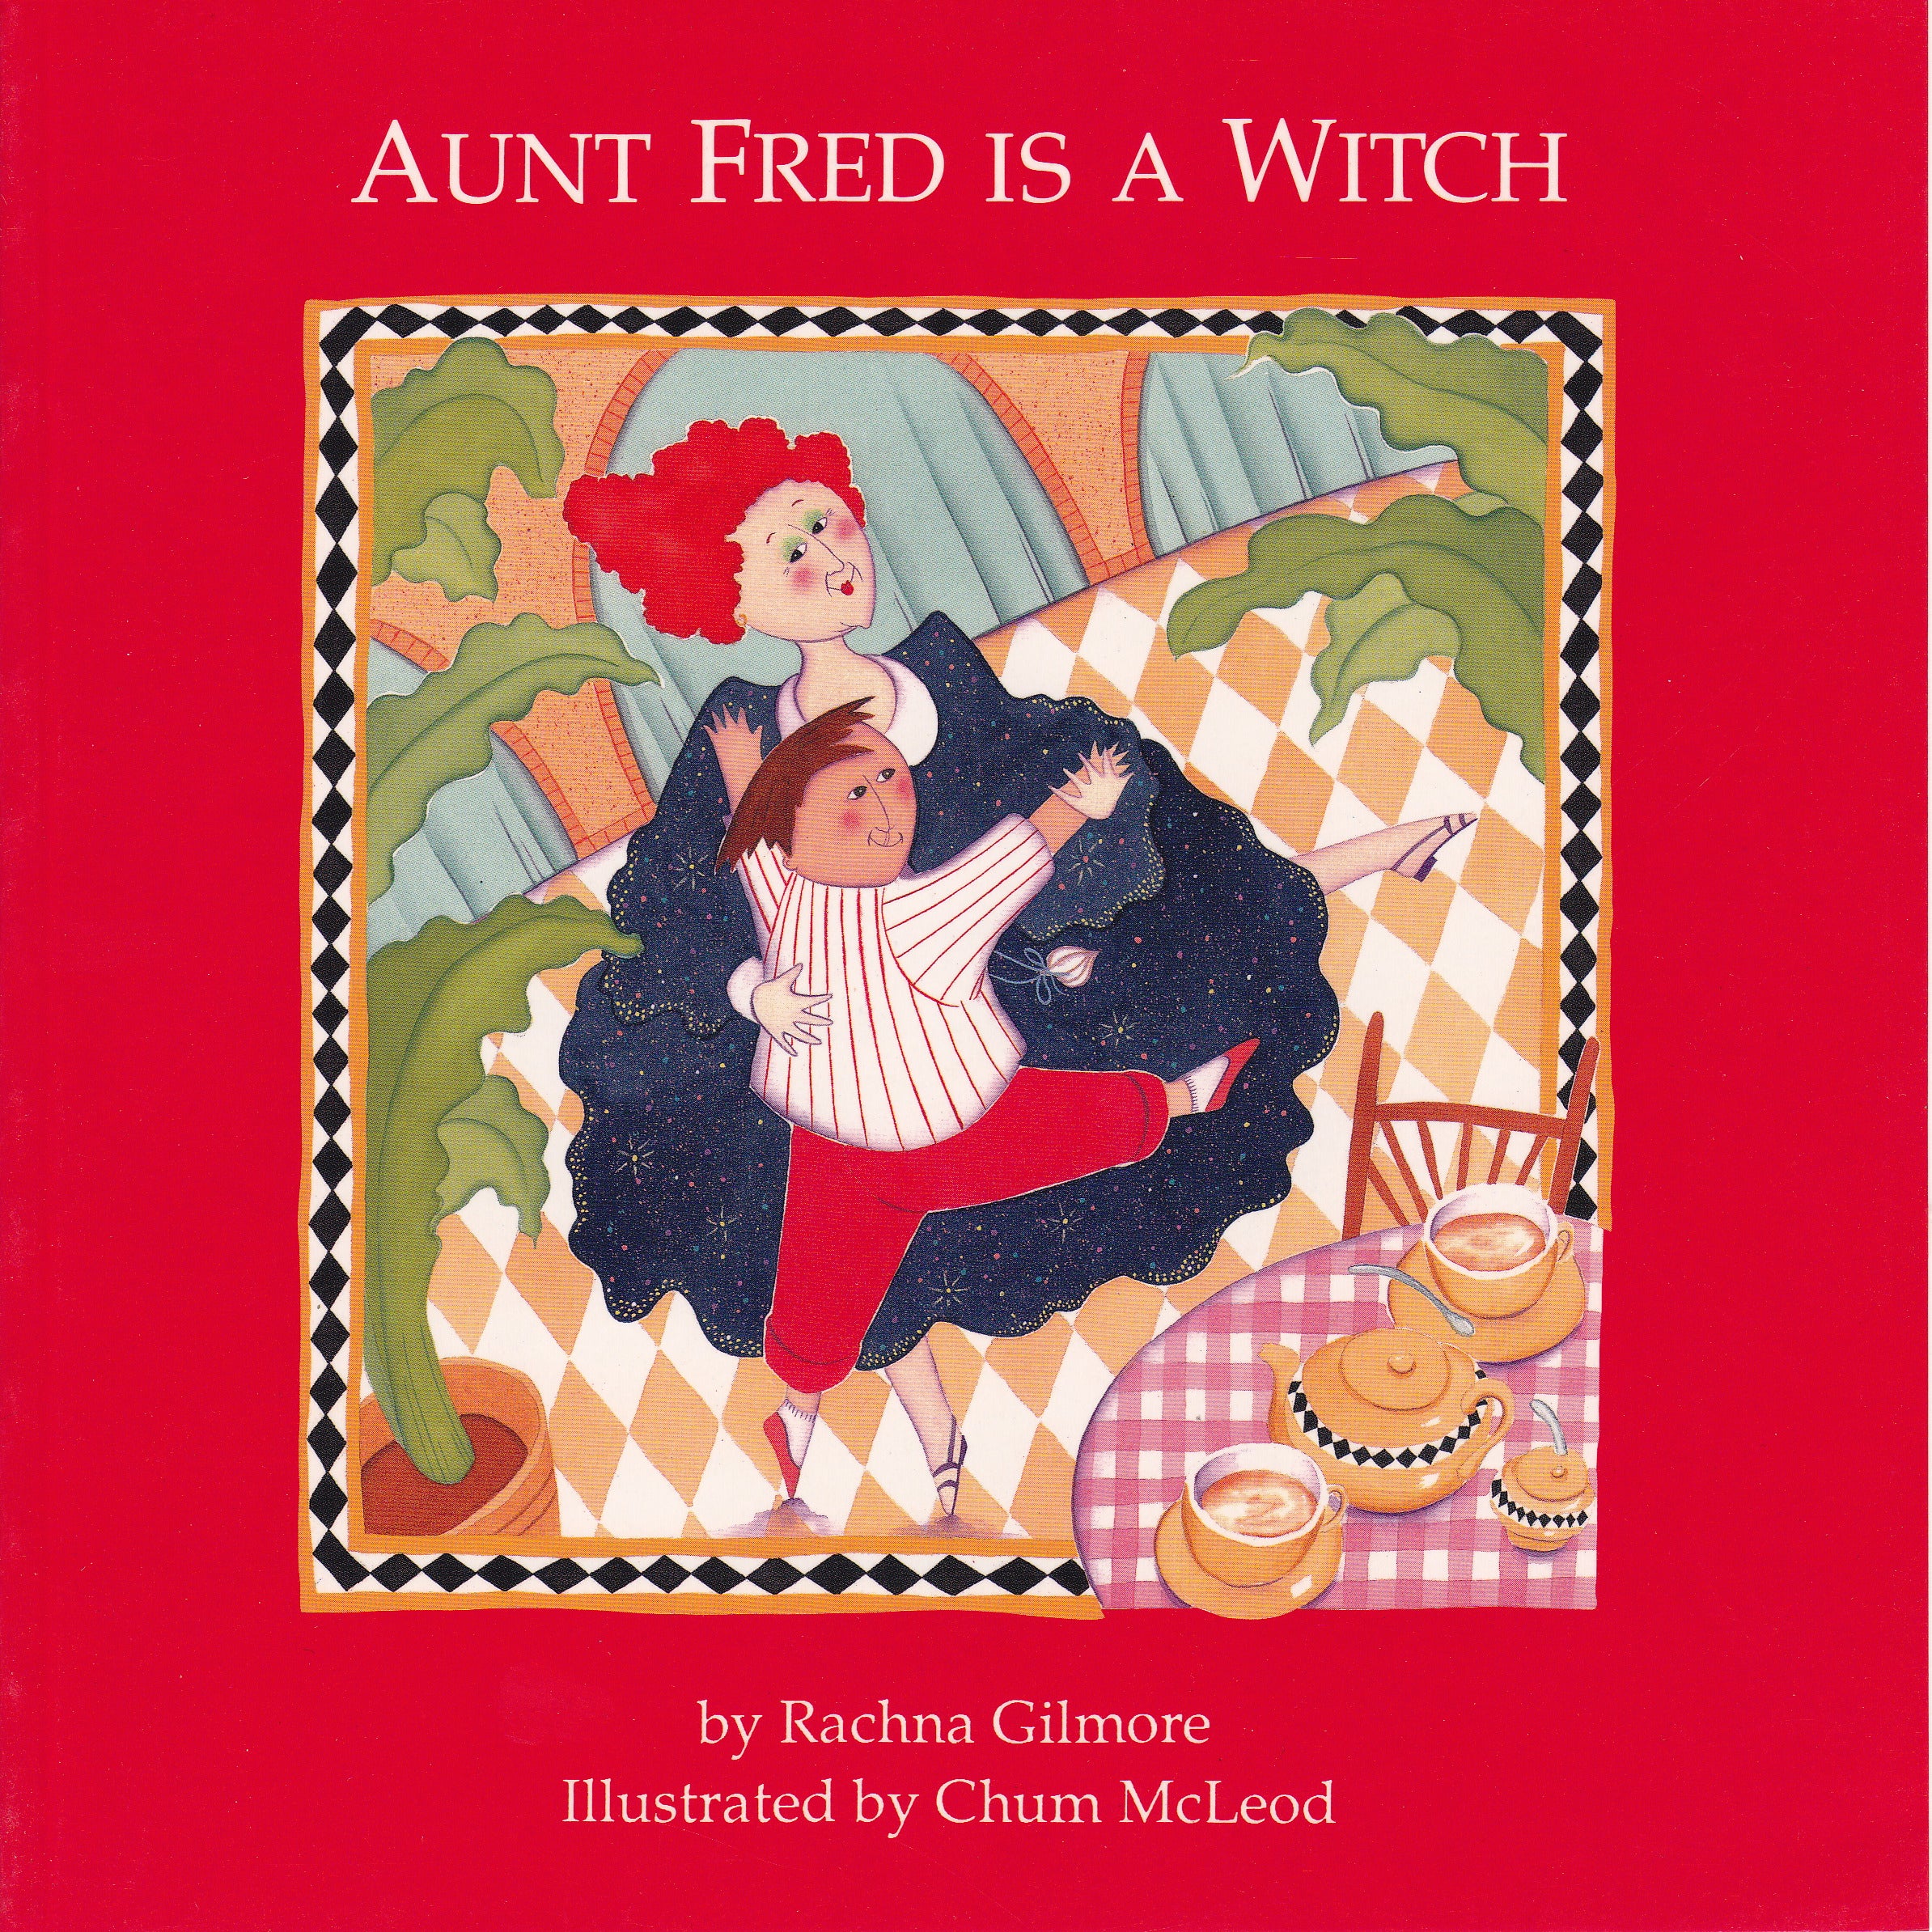 Aunt Fred is a Witch